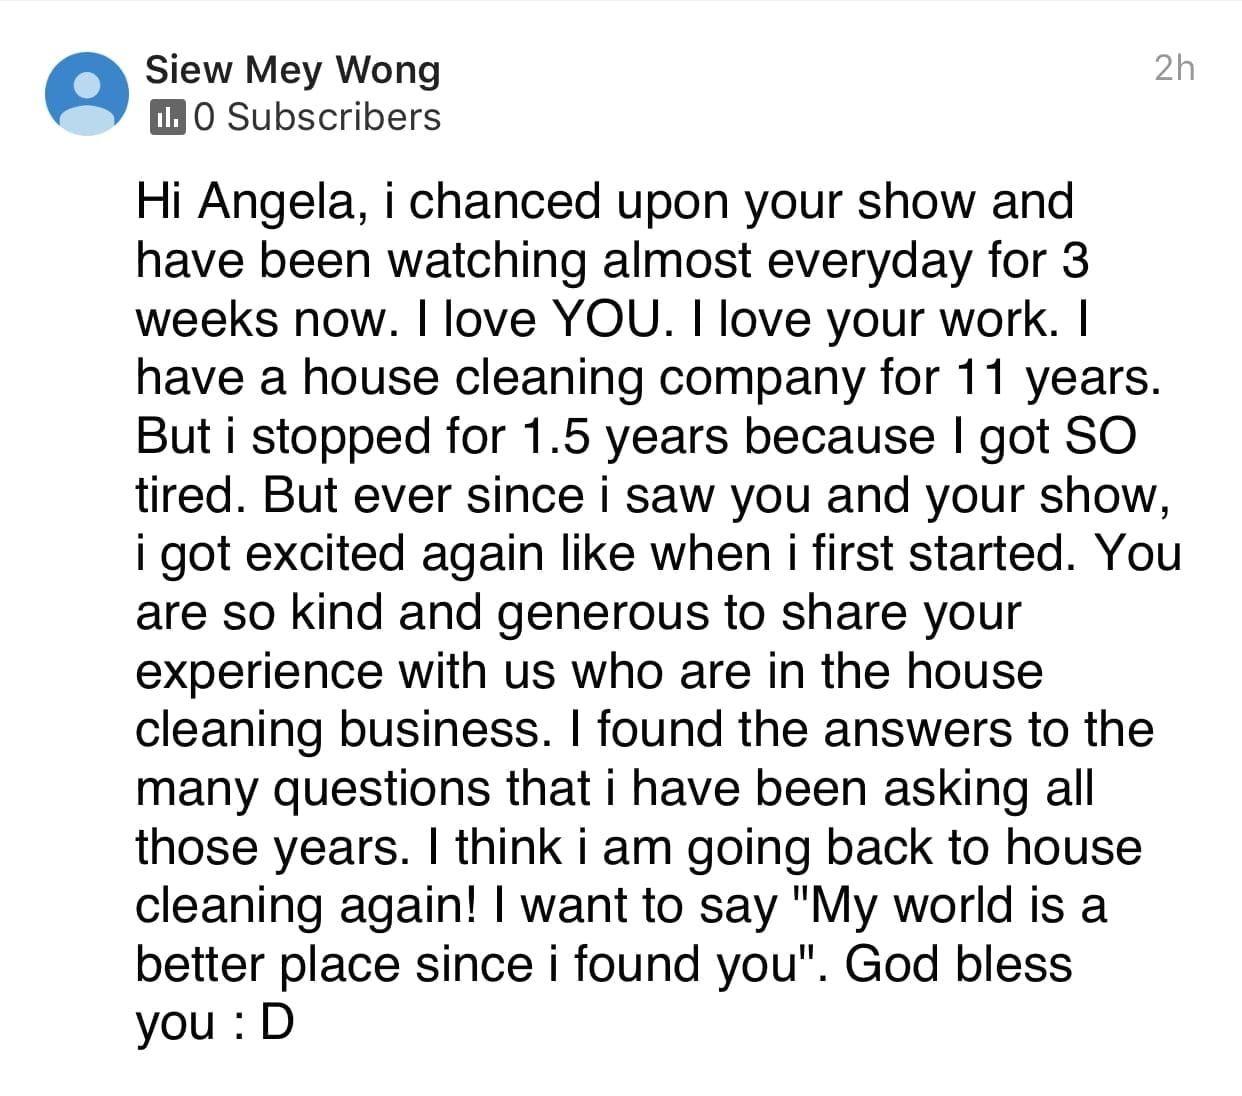 I love your work, Ask a House Cleaner Testimonial